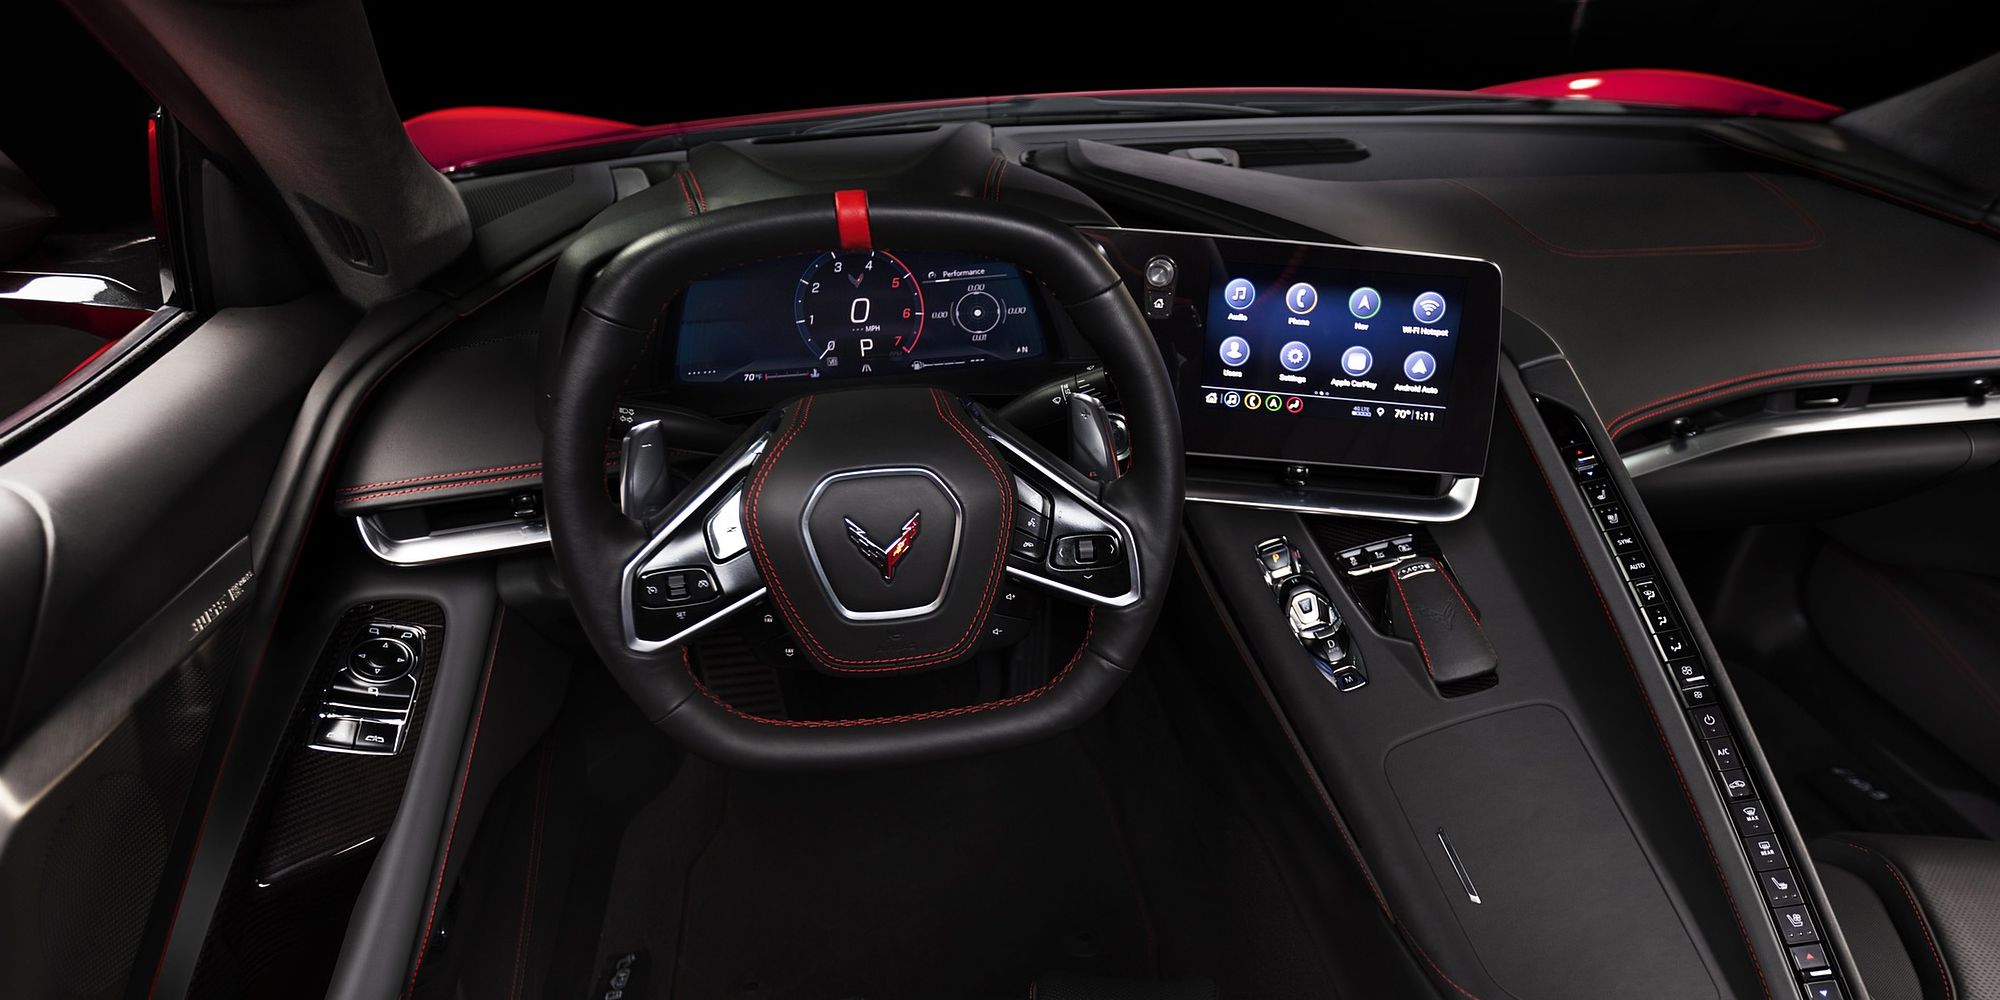 The interior of the Corvette Stingray, behind the wheel